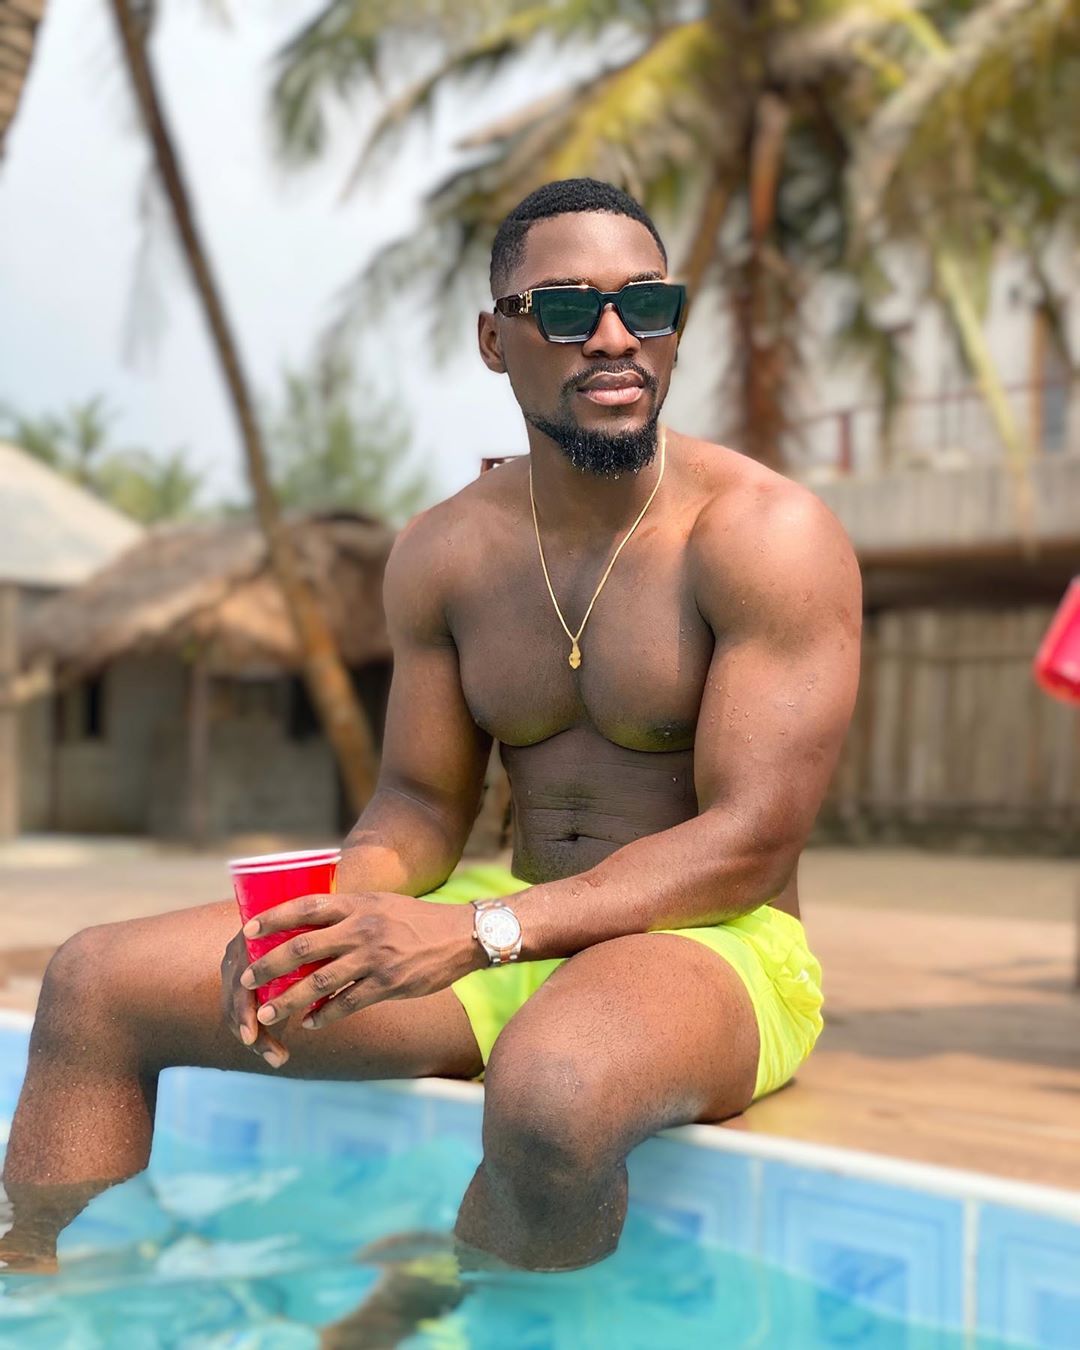 His career and endorsement have earned him an ever-increasing relevance in the entertainment industry. [Instagram/TobiBakre]